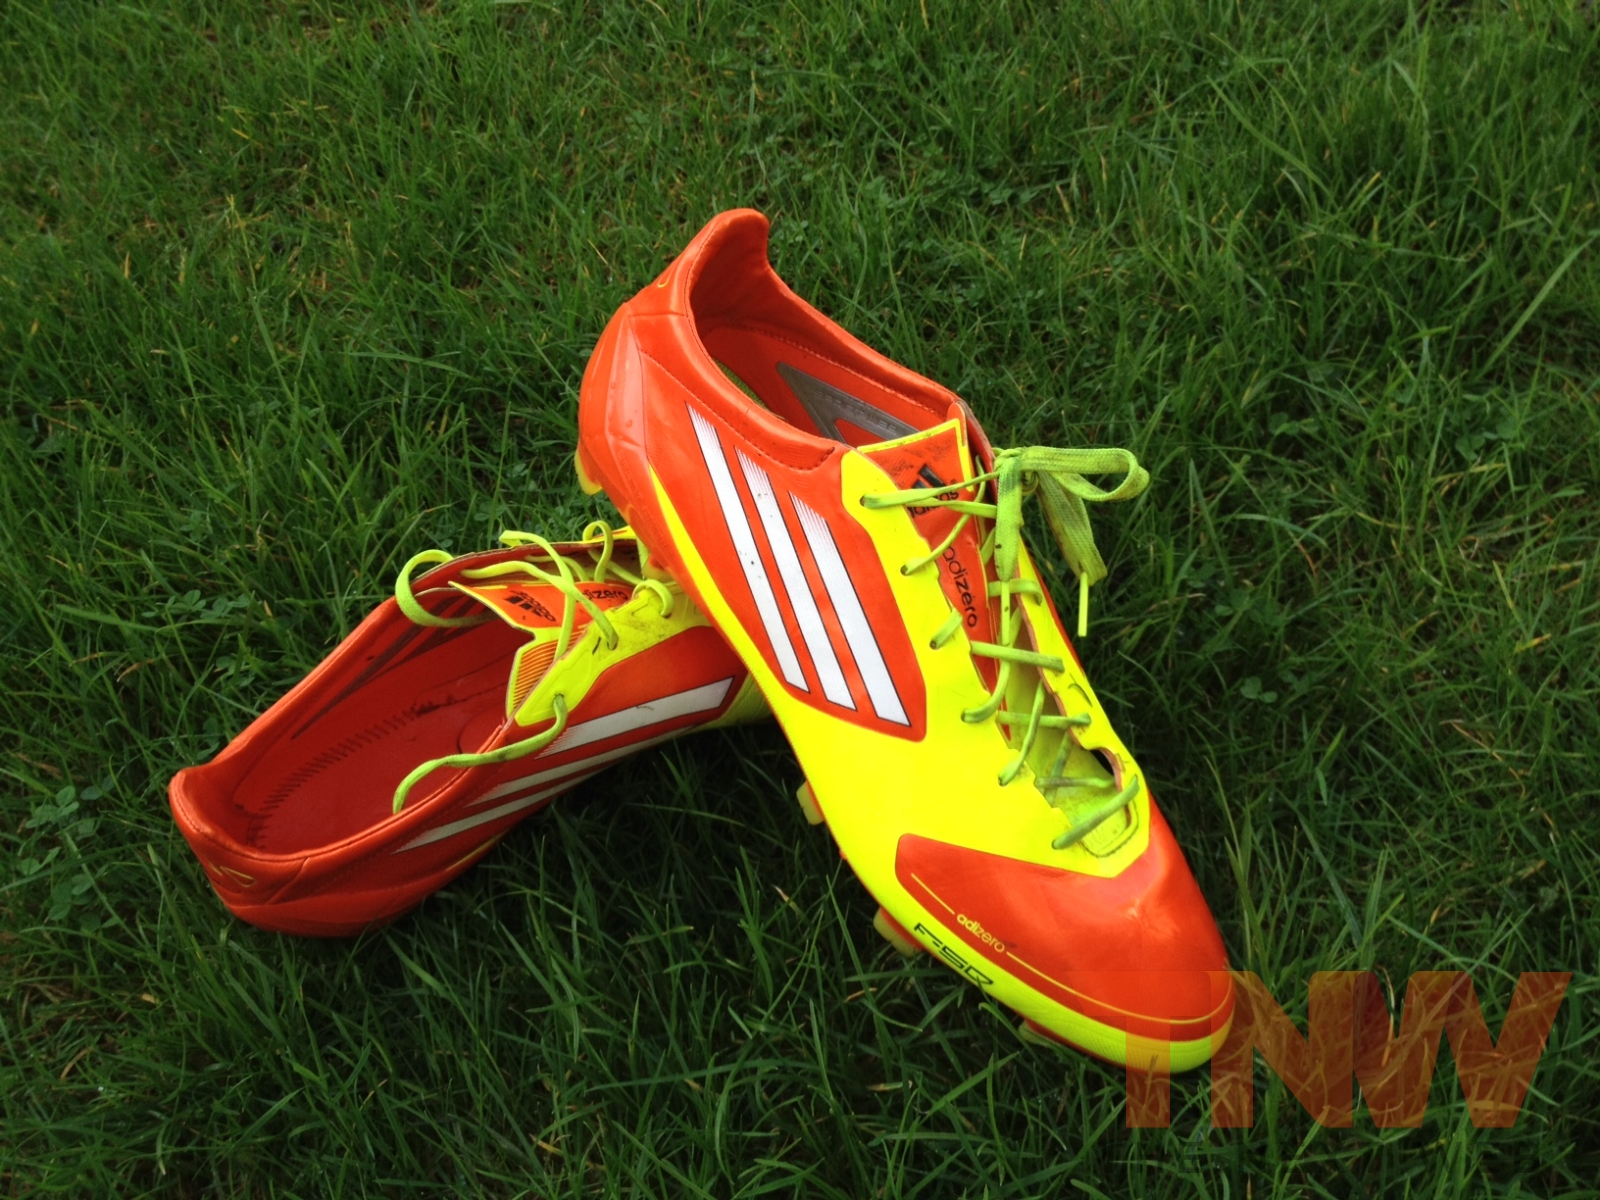 Review: Adidas adizero F50 Boots and Speed_Cell